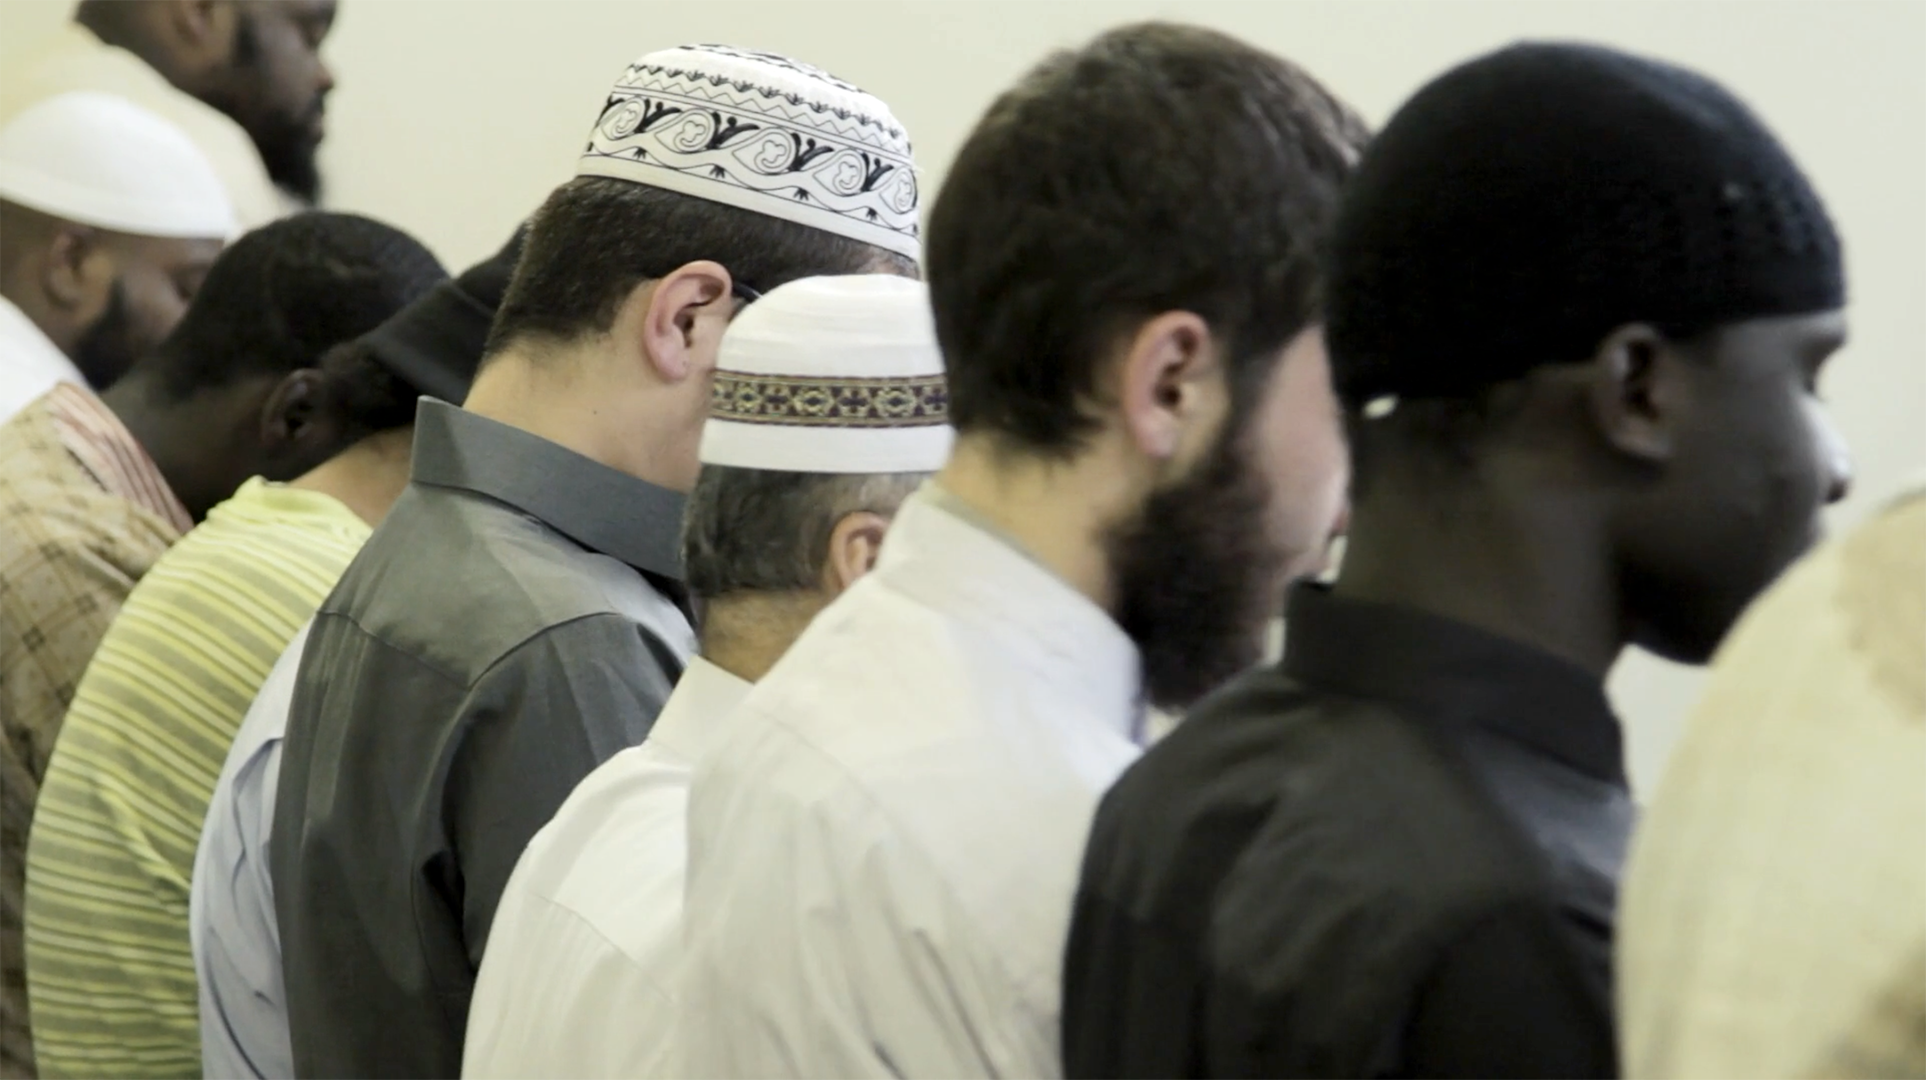 An image showing the back of several men, some wearing Omani caps.